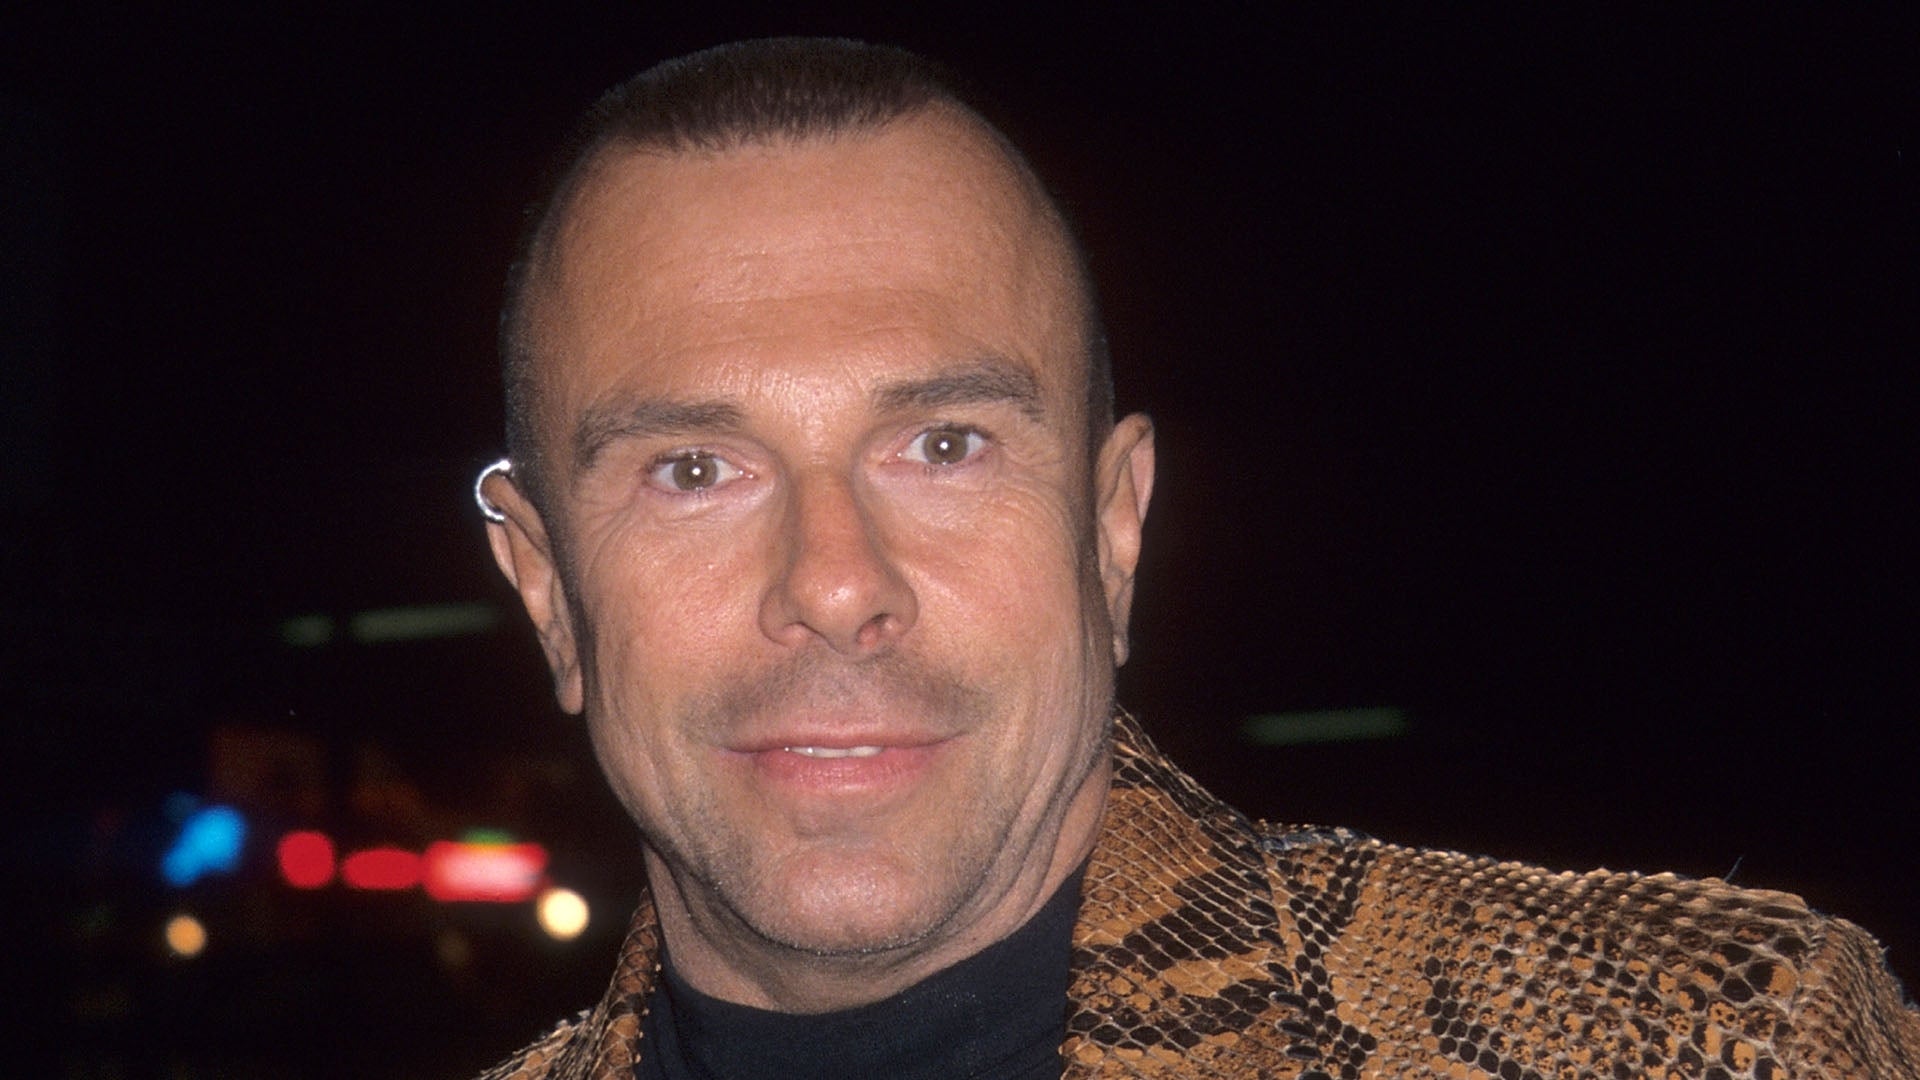 Thierry Mugler, Iconic French Fashion Designer, Dead at 73